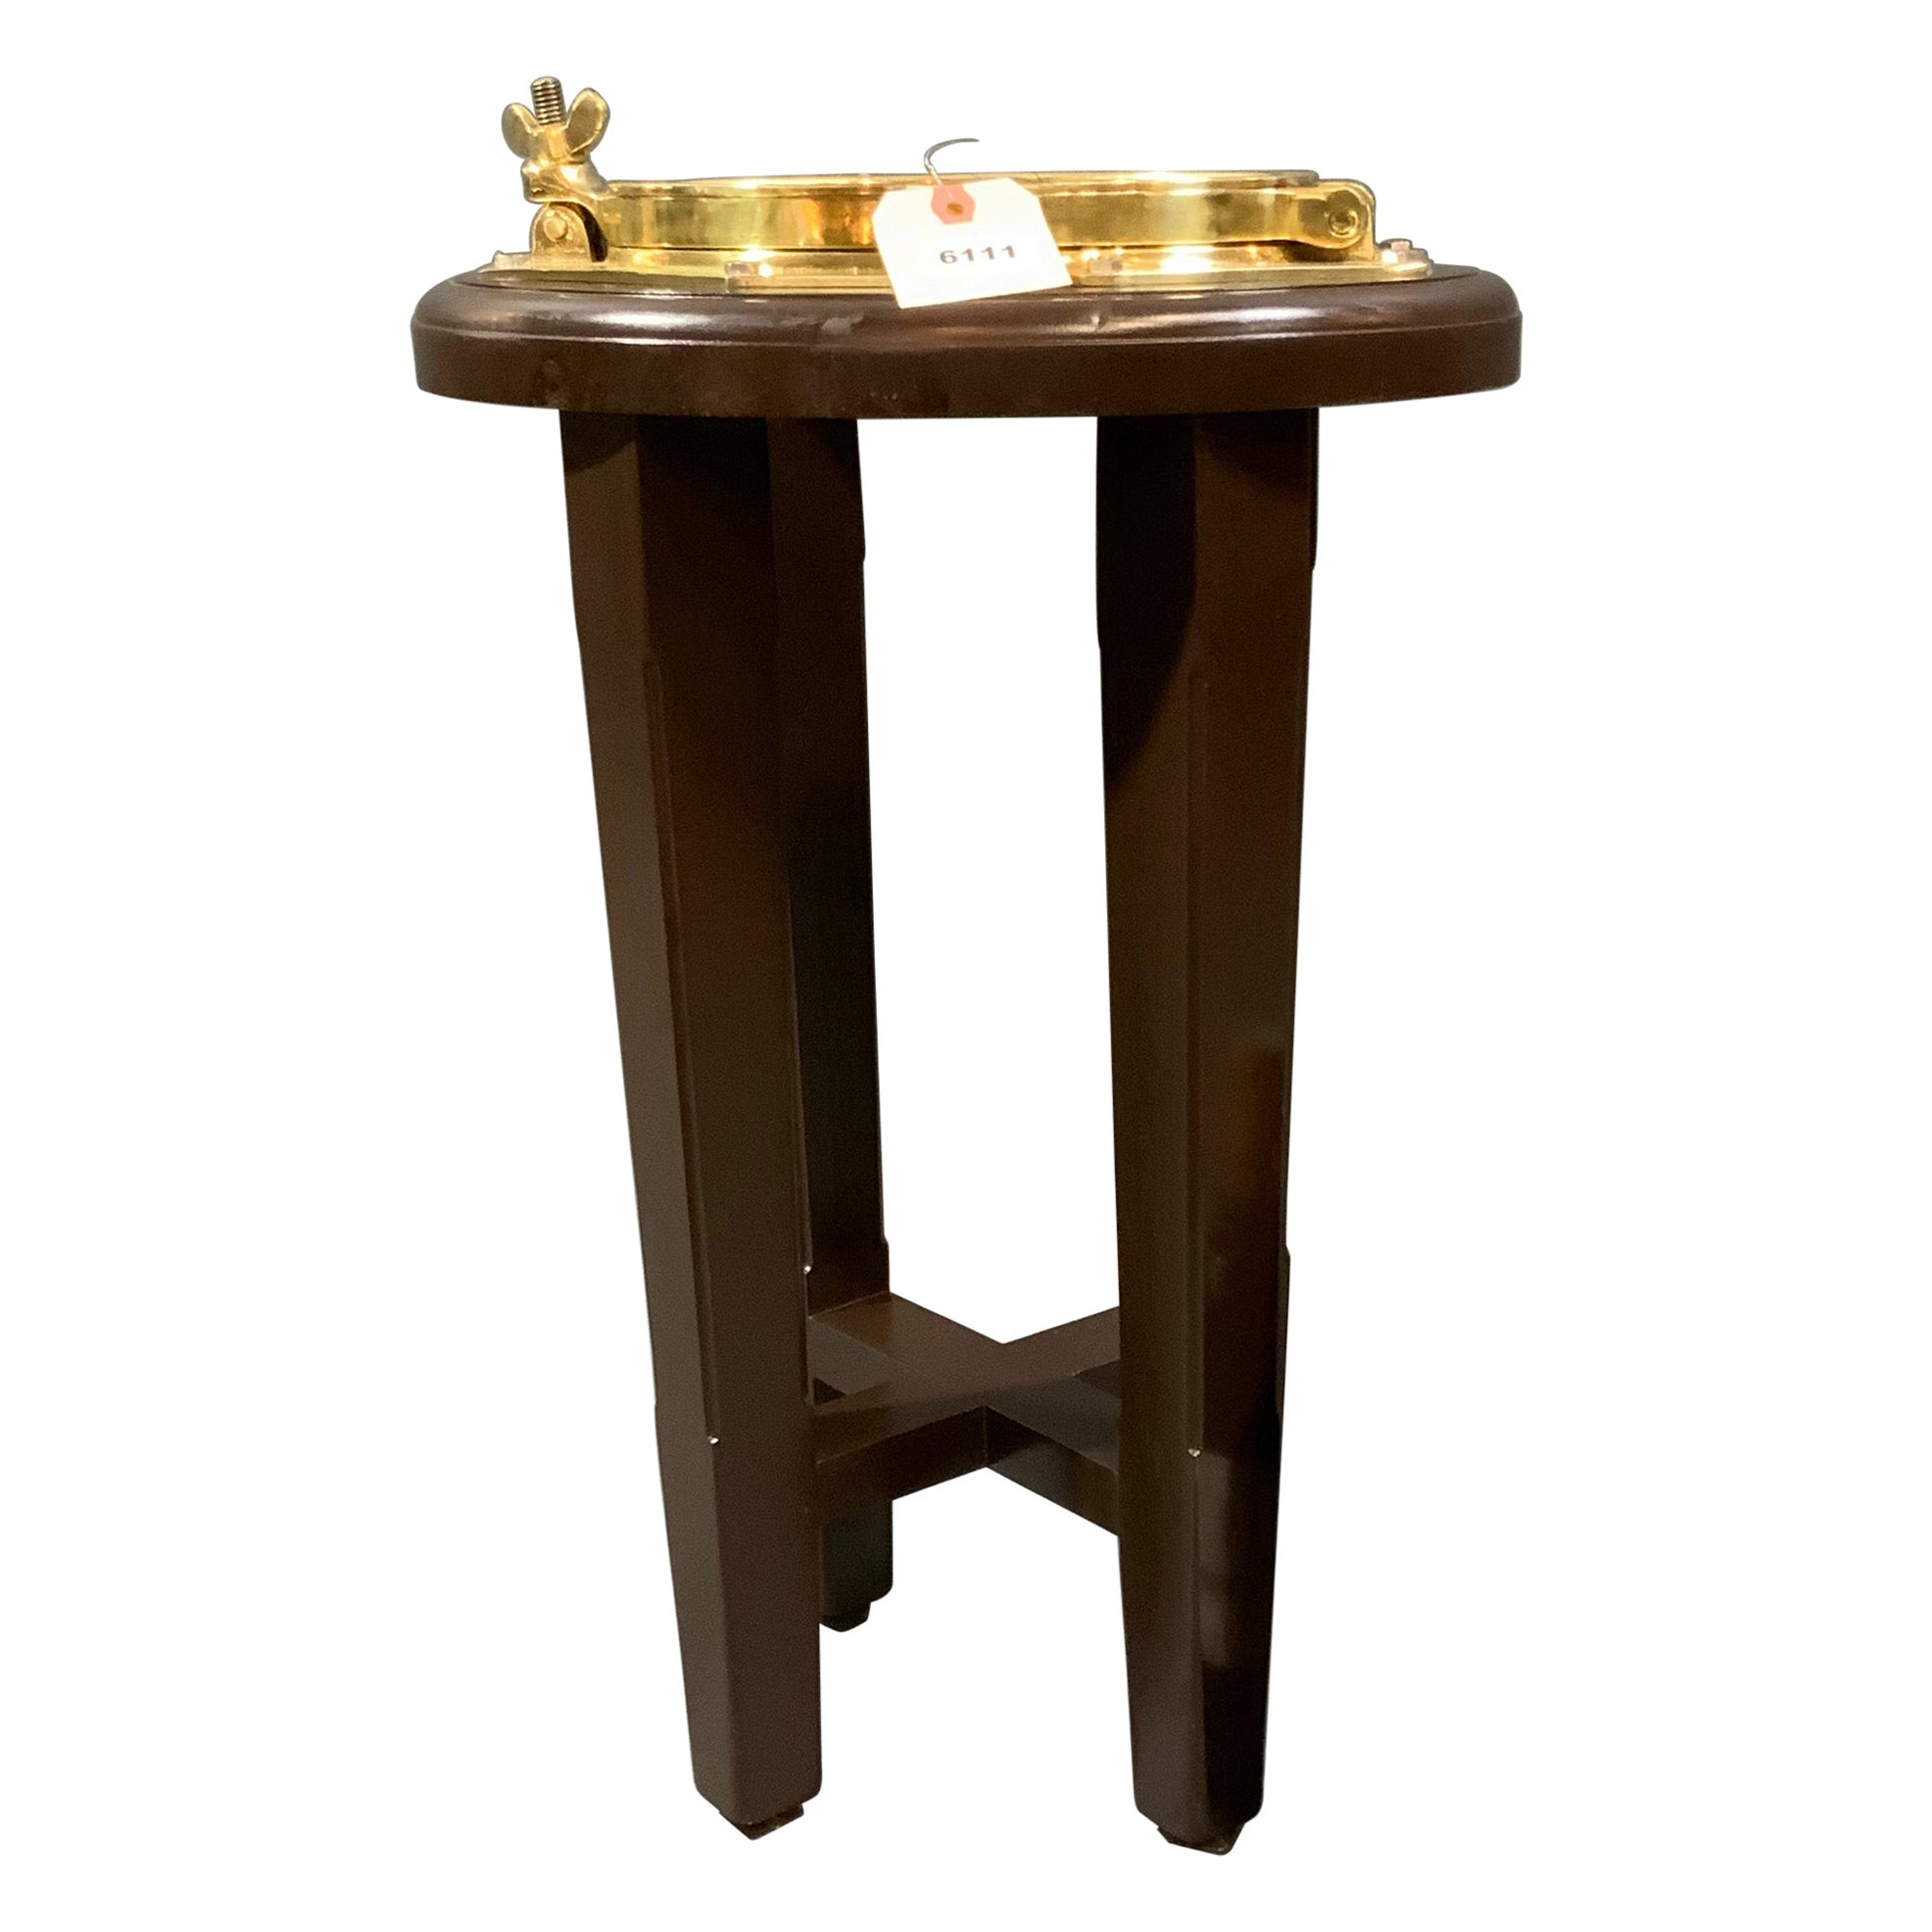 Authentic Solid Brass Boat Porthole Table For Sale